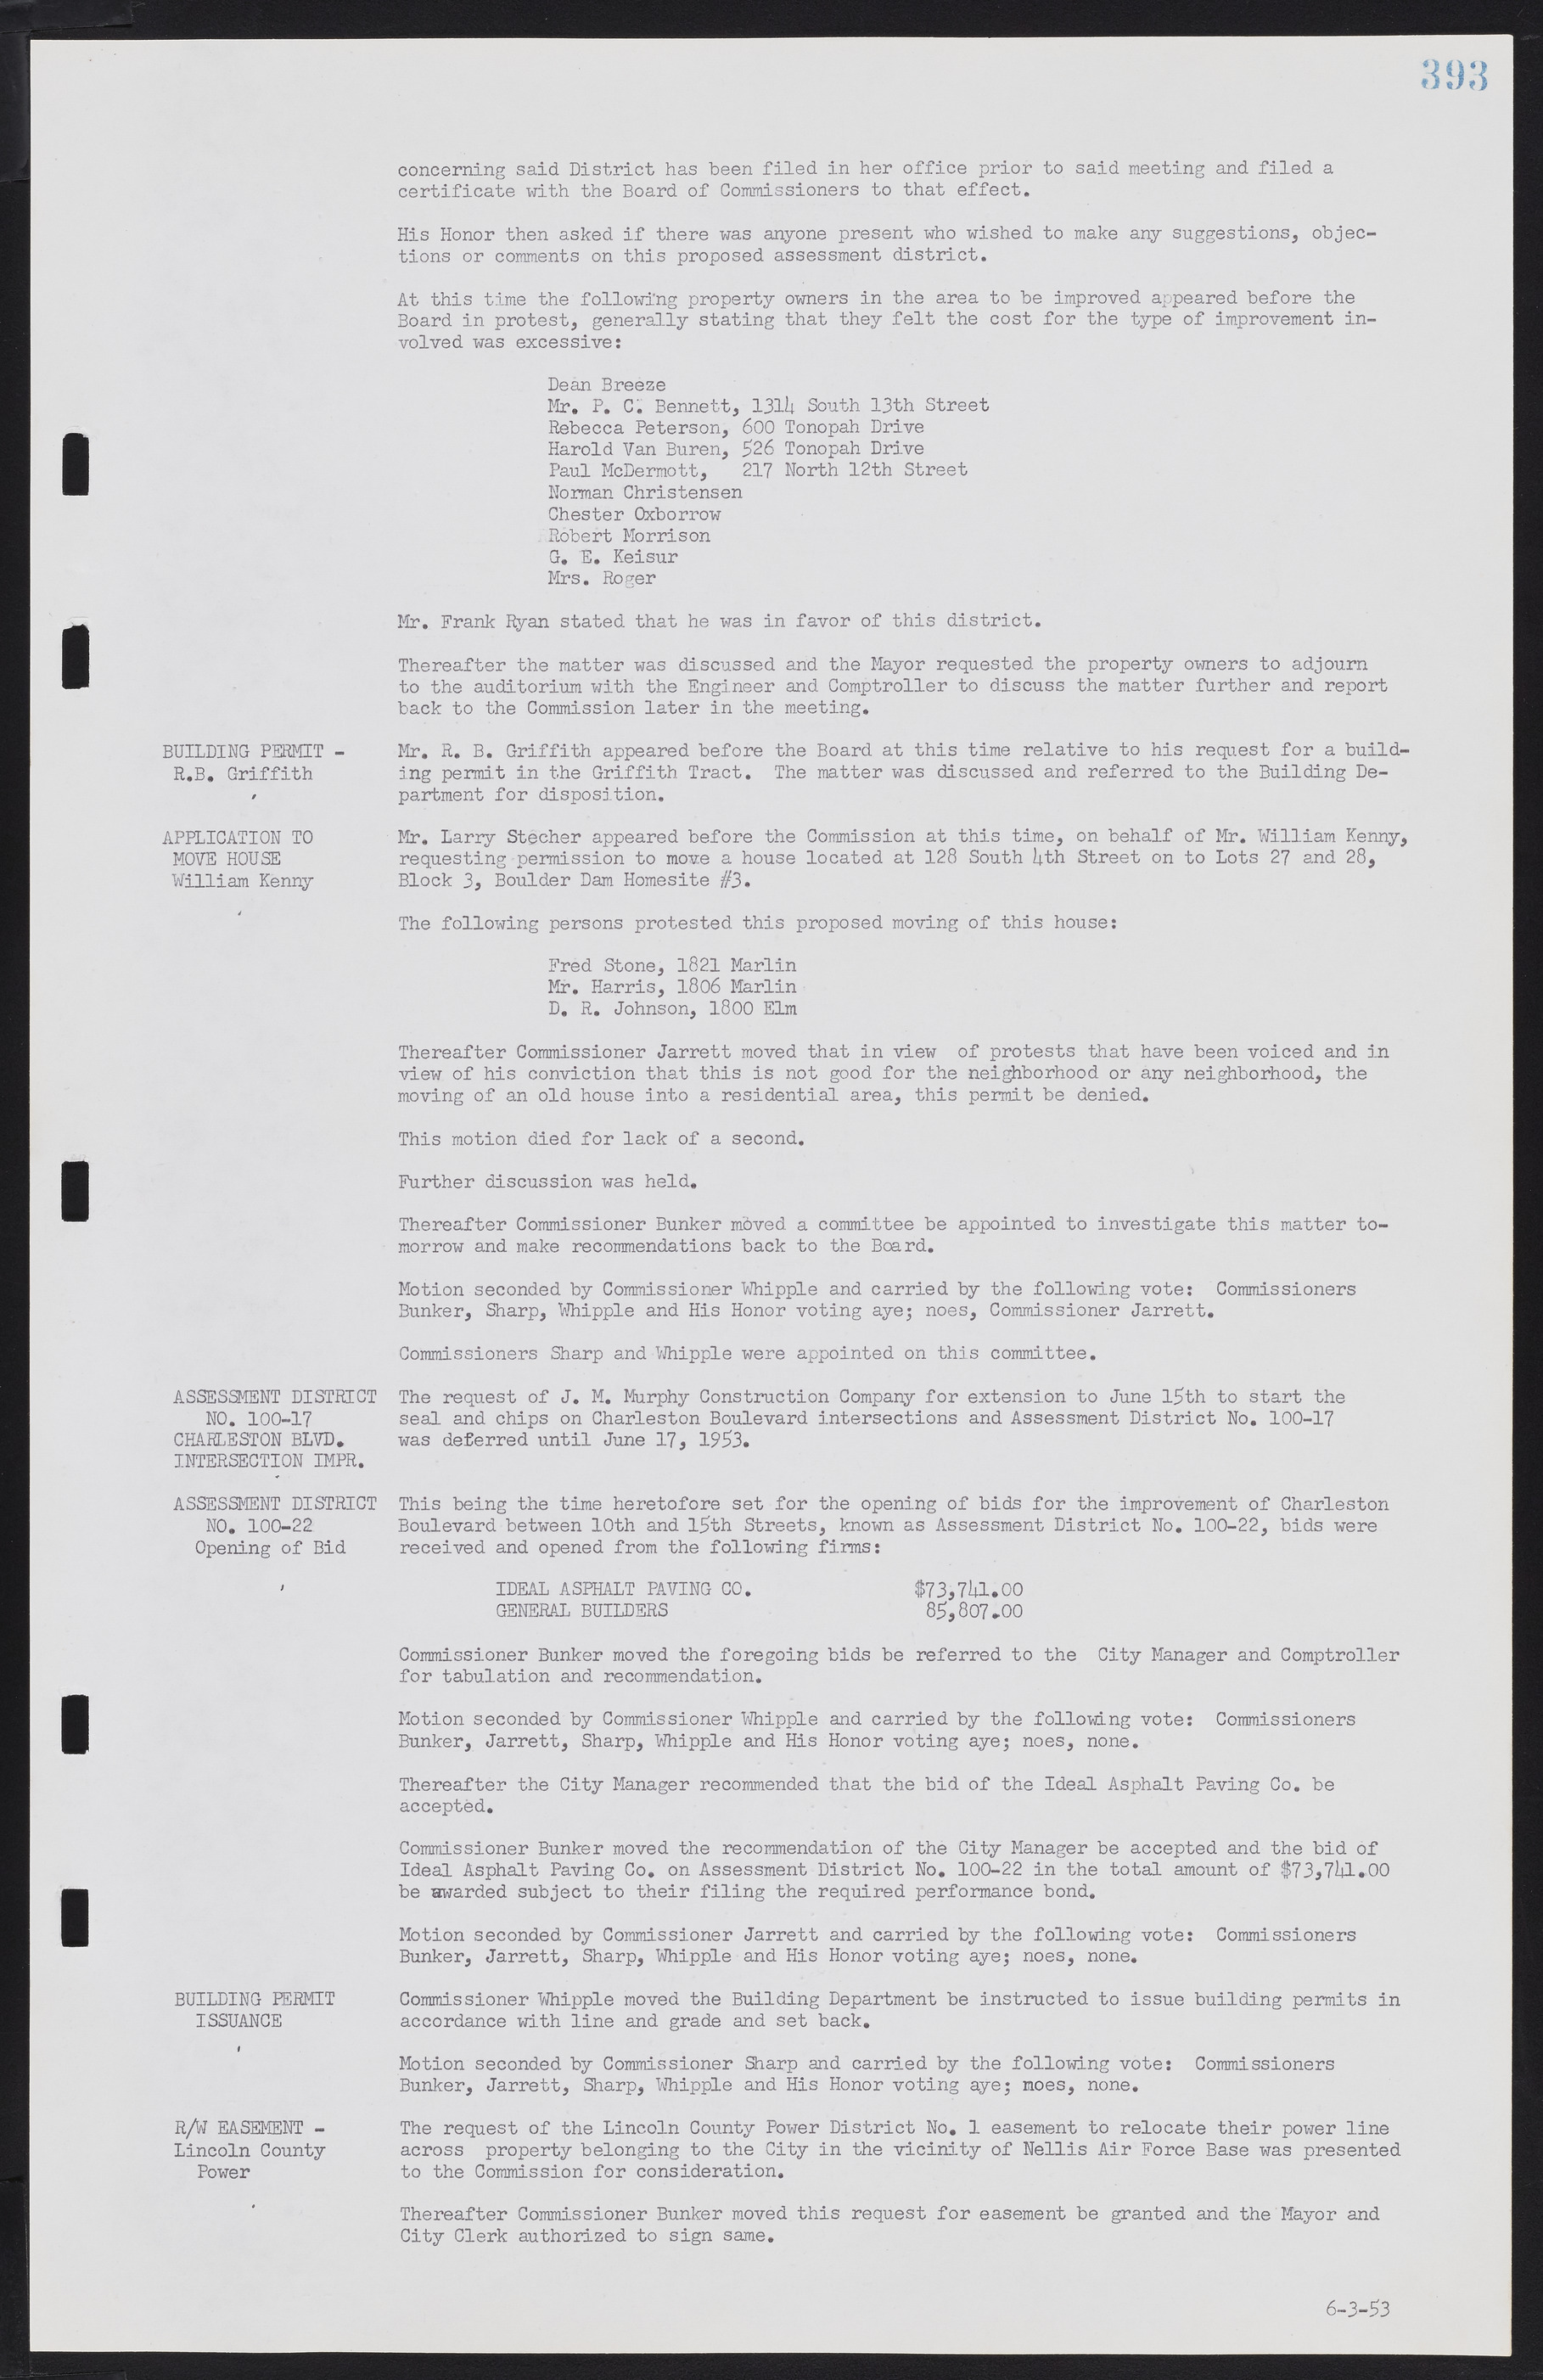 Las Vegas City Commission Minutes, May 26, 1952 to February 17, 1954, lvc000008-421